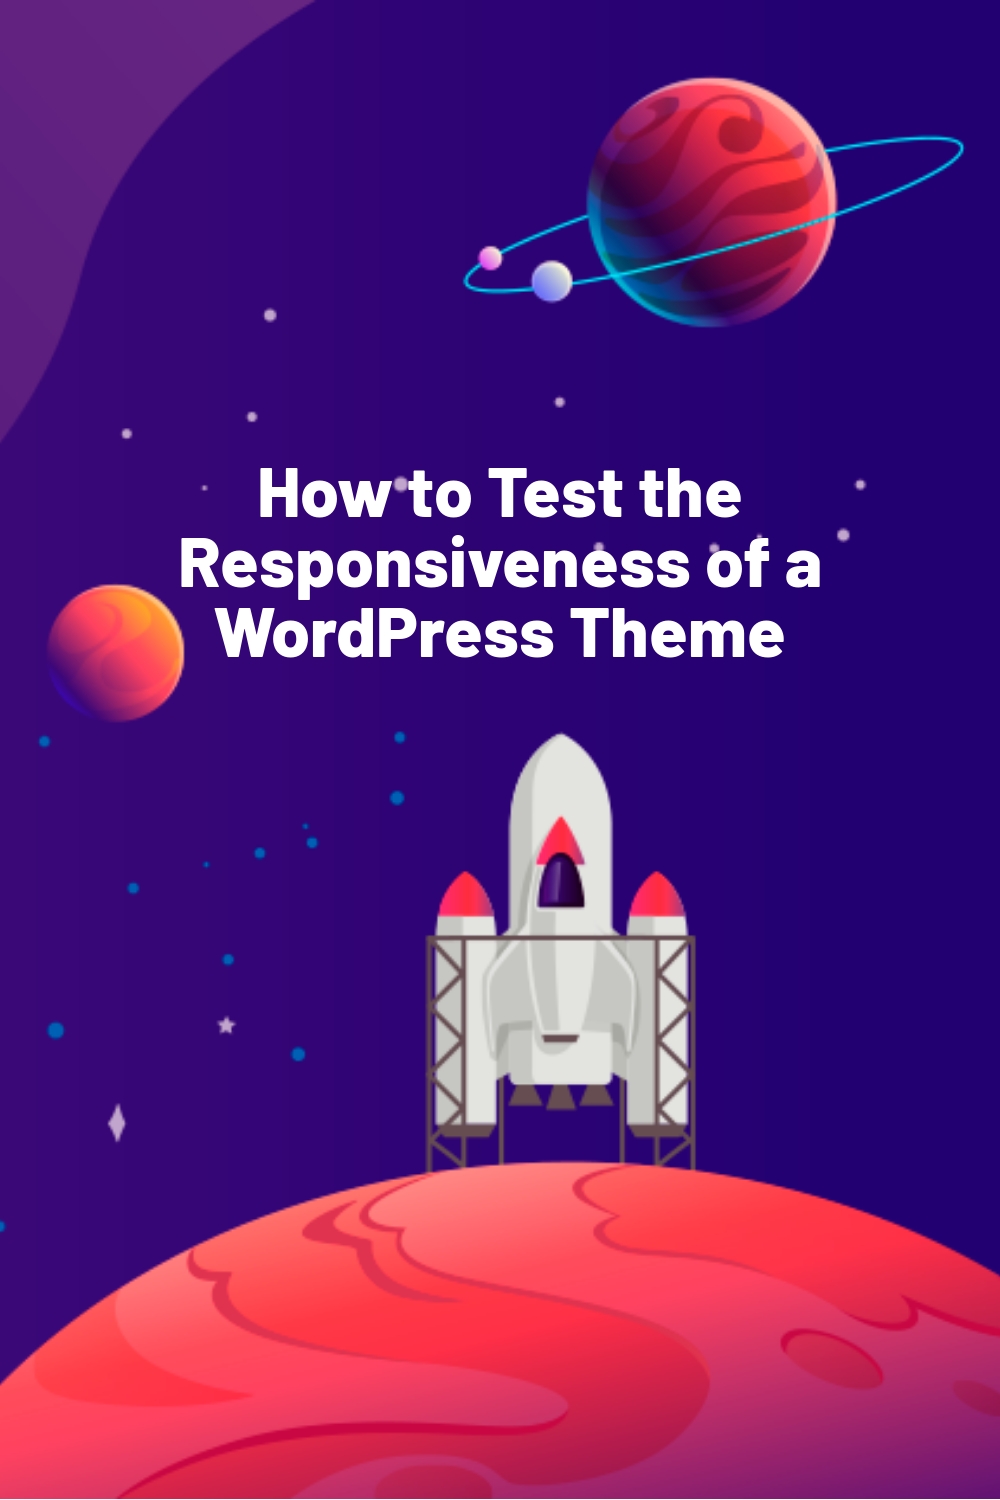 How to Test the Responsiveness of a WordPress Theme